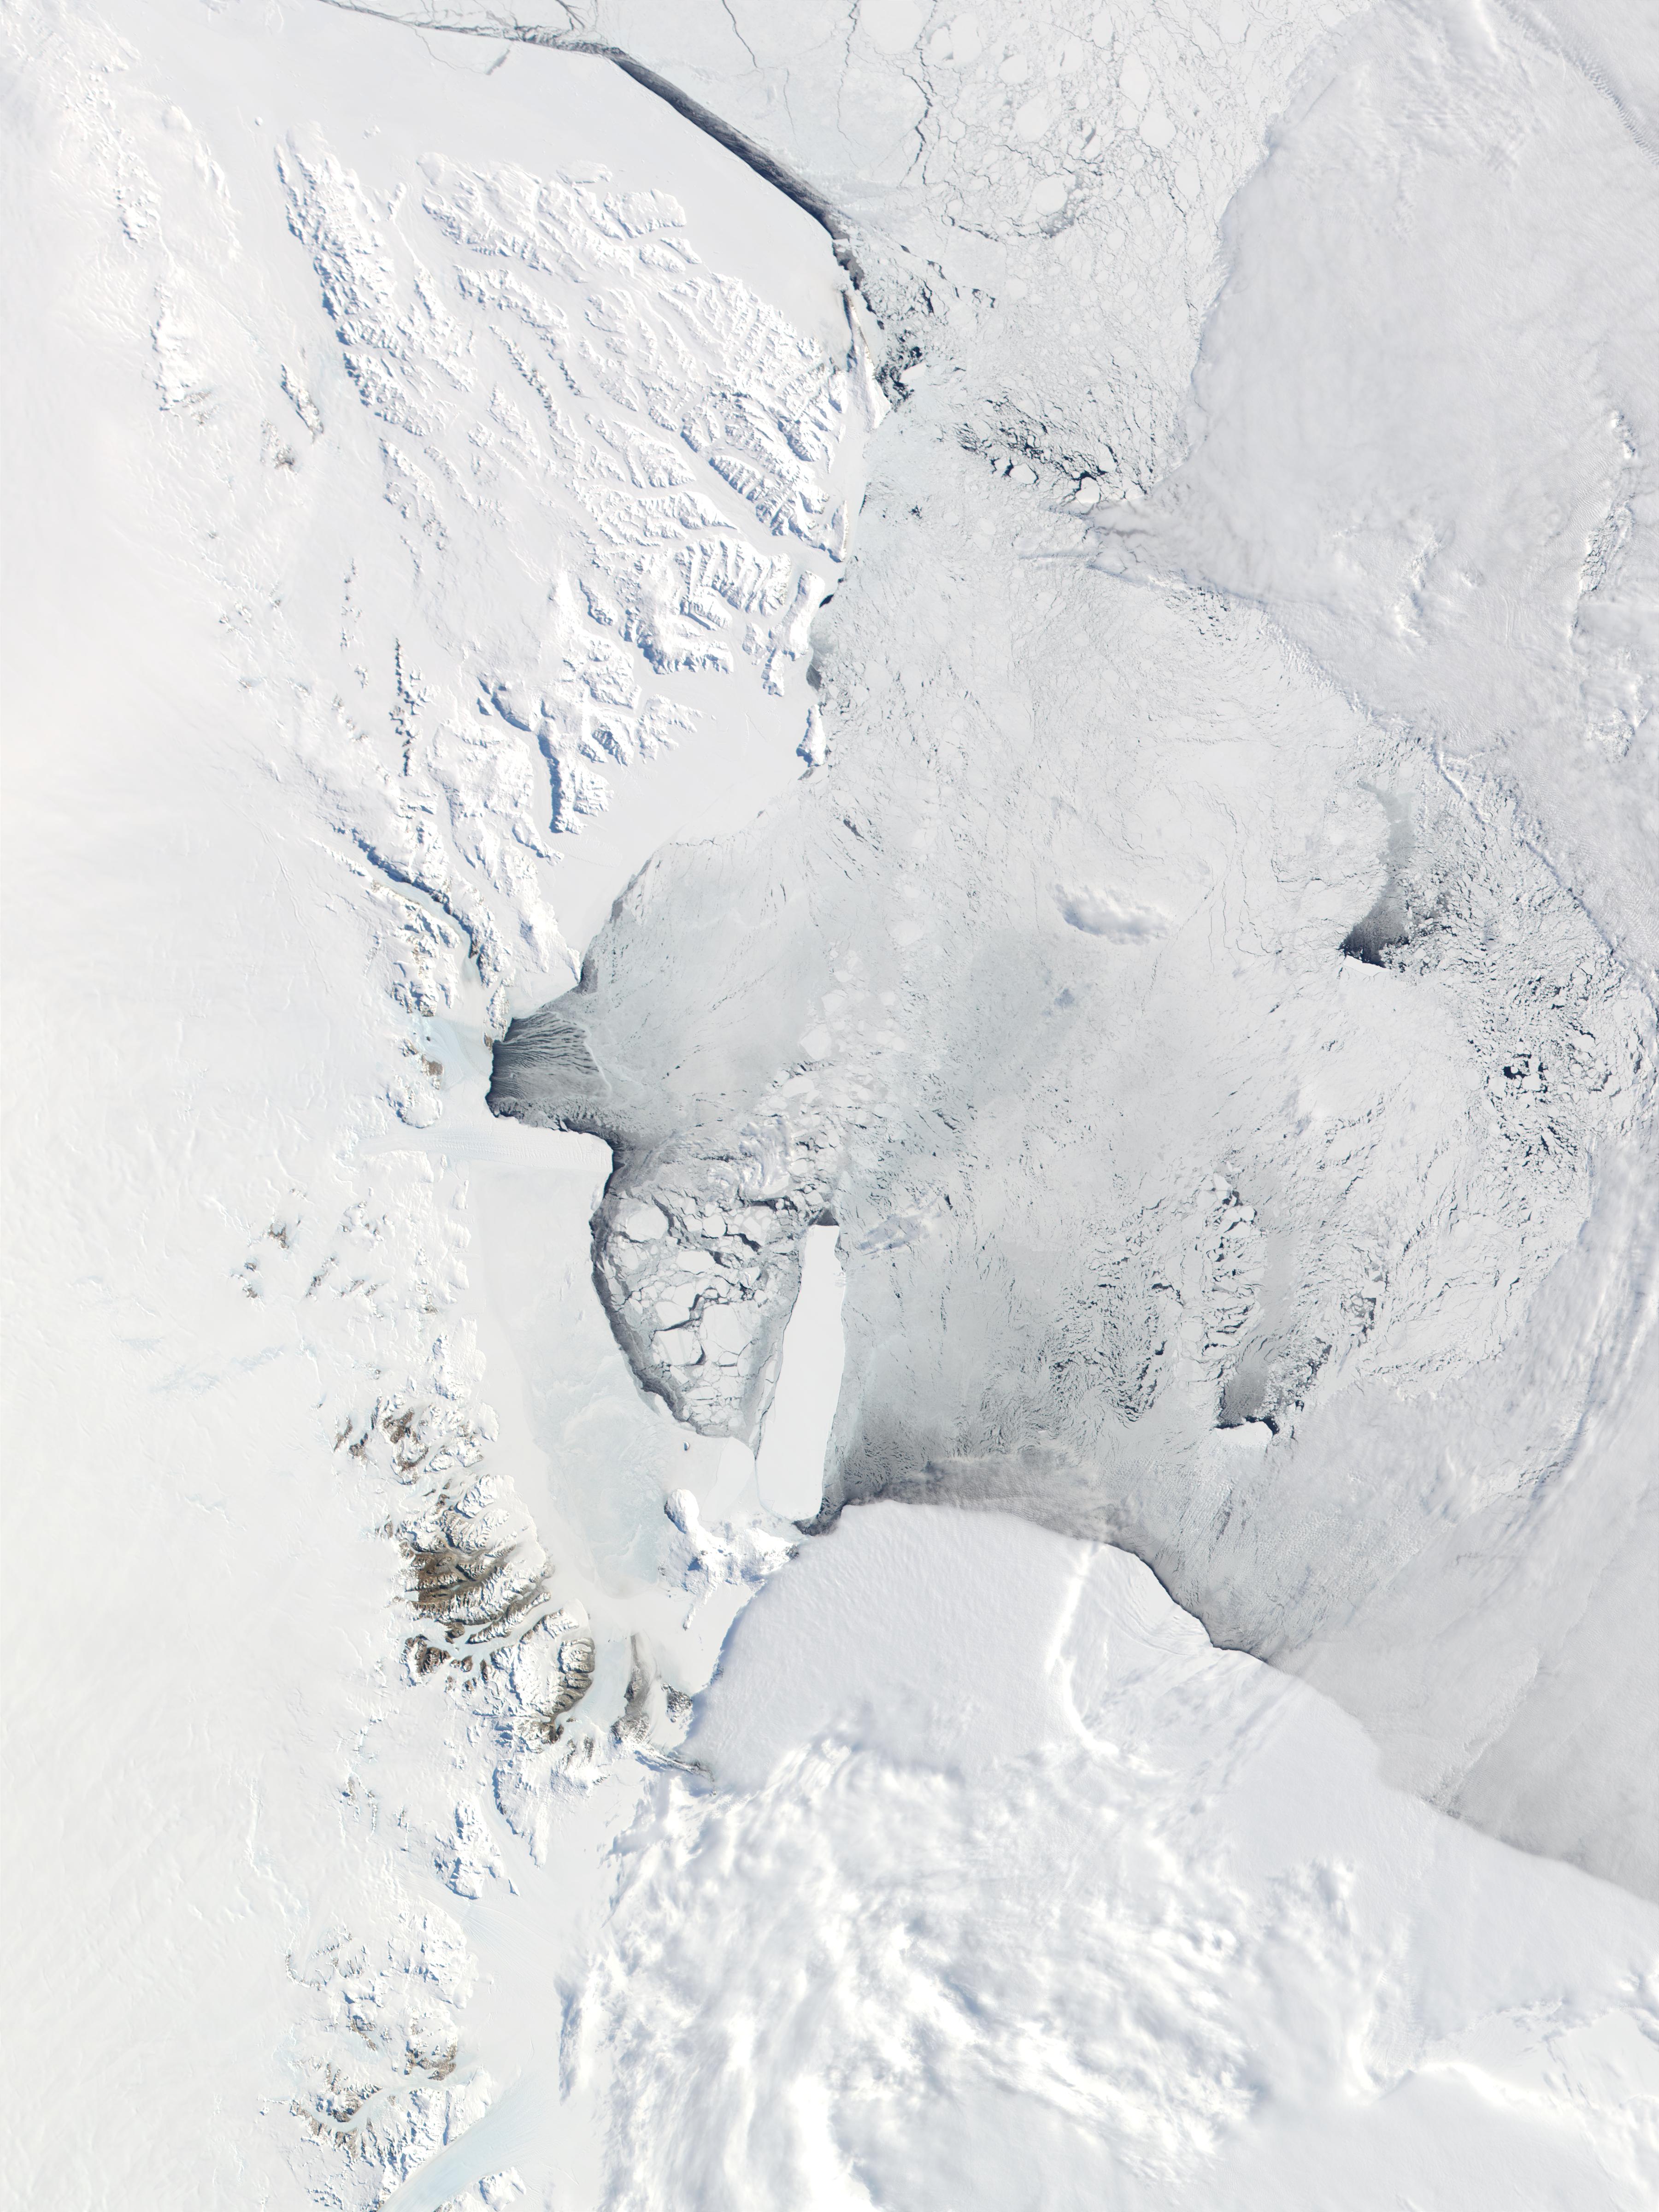 Victoria Land and Ross Ice Shelf, Antarctica - related image preview